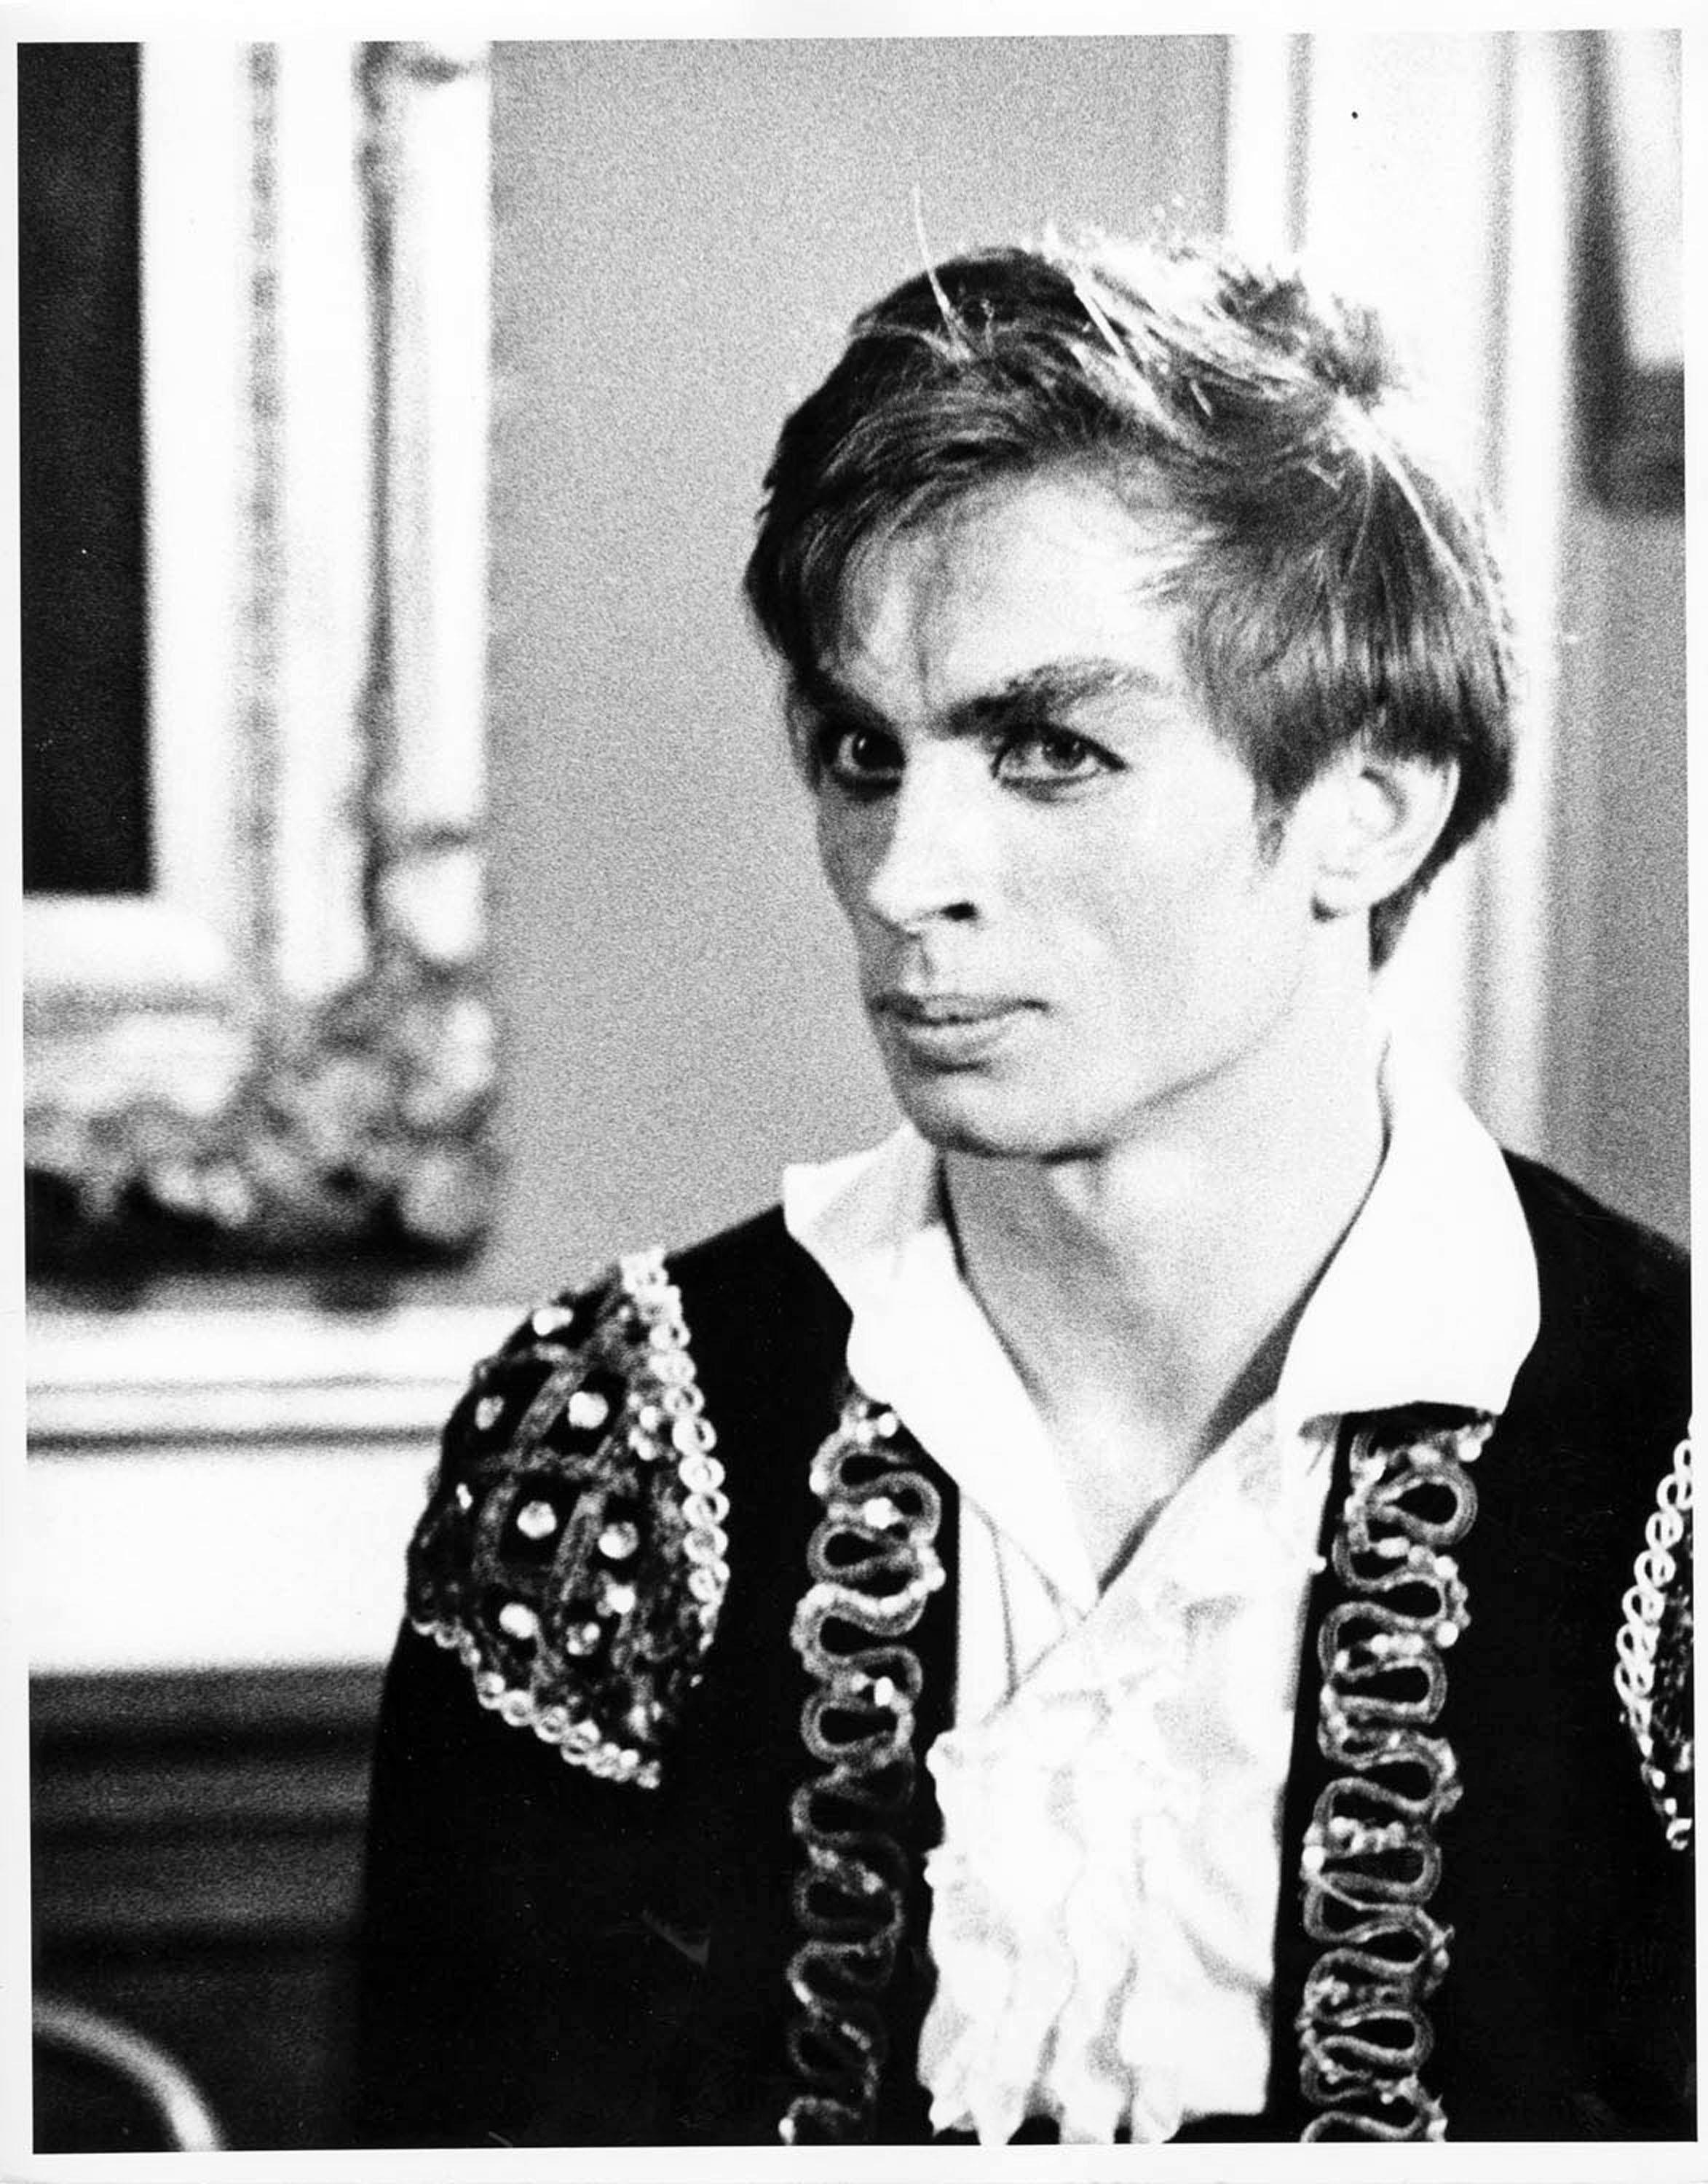 Jack Mitchell Black and White Photograph - Rudolf Nureyev photographed just after his debut performance May 10, 1962.